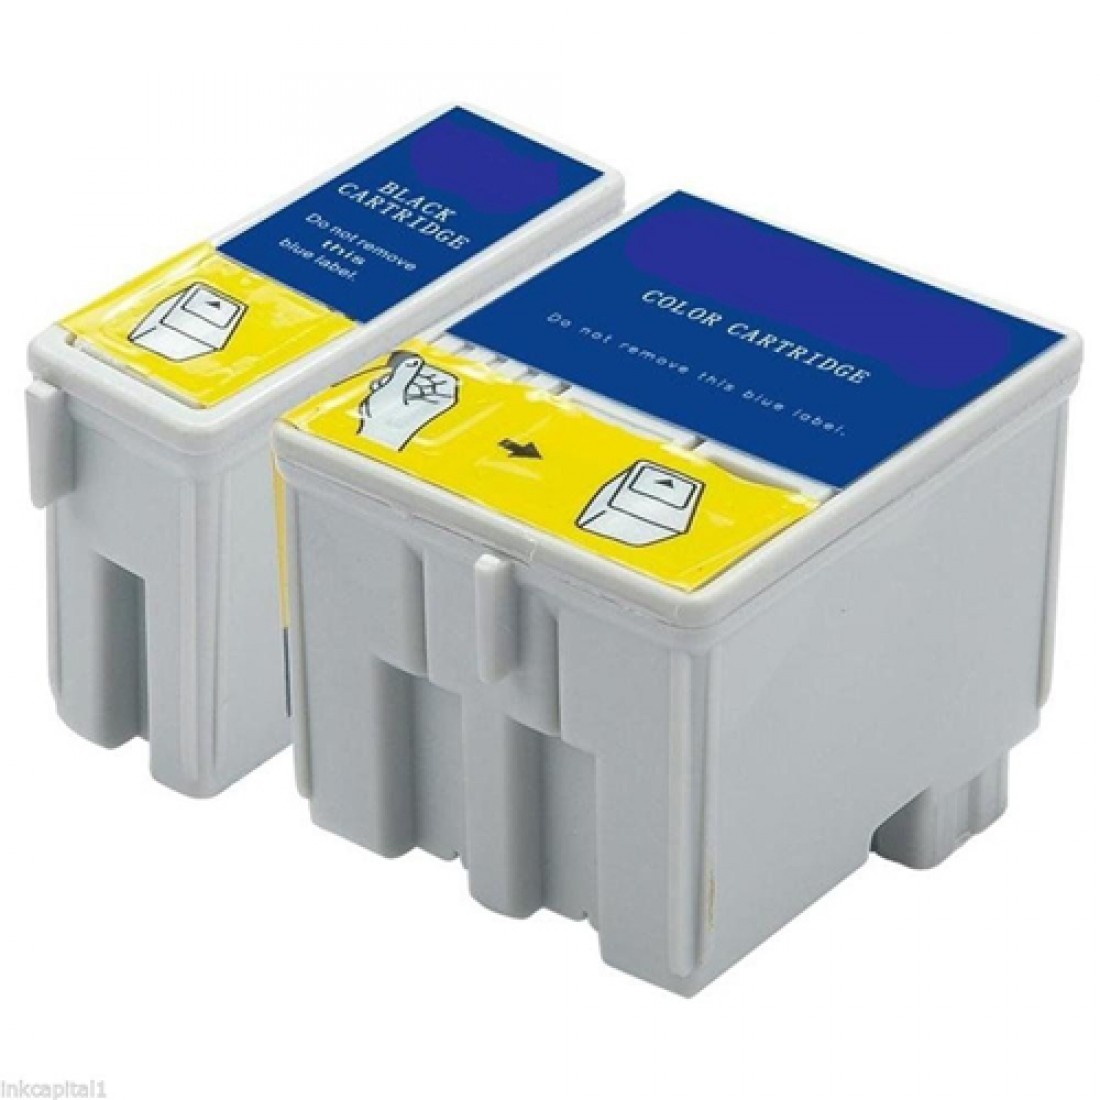 Epson T007 Ink Cartridges Cheap Epson Inks Cheapinks 5036